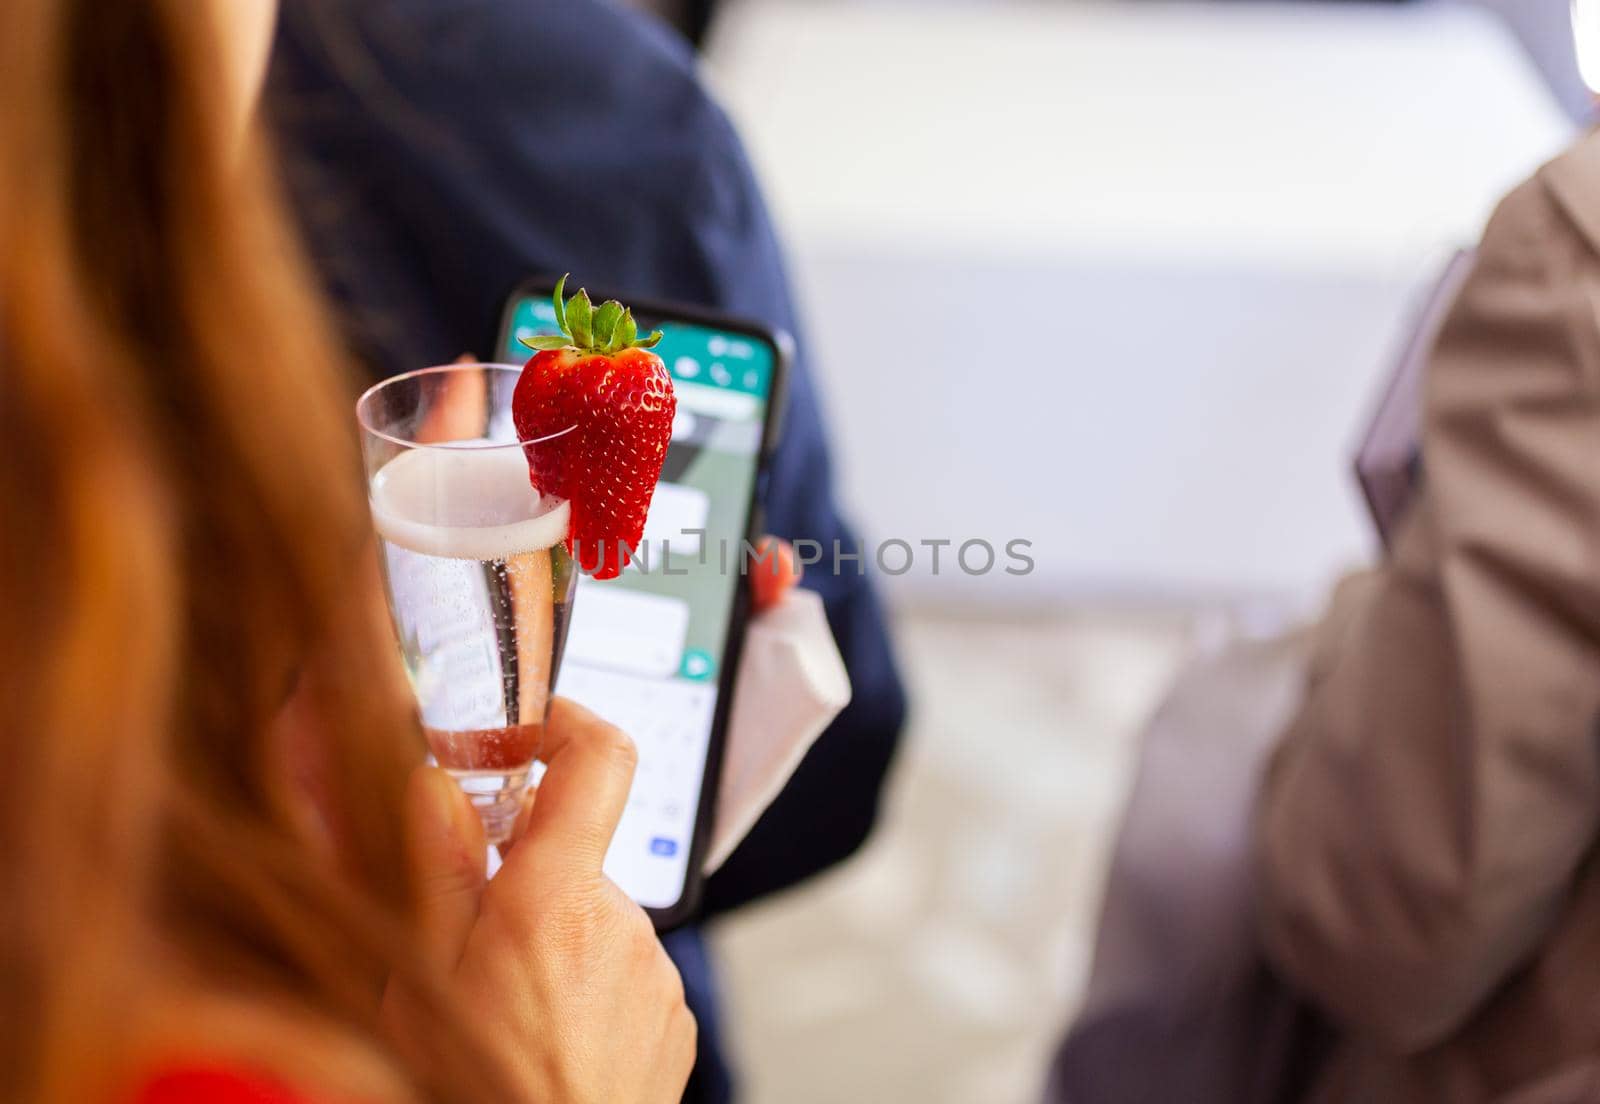 Drinking a prosecco white wine with Strawberry decor while using a smartphone